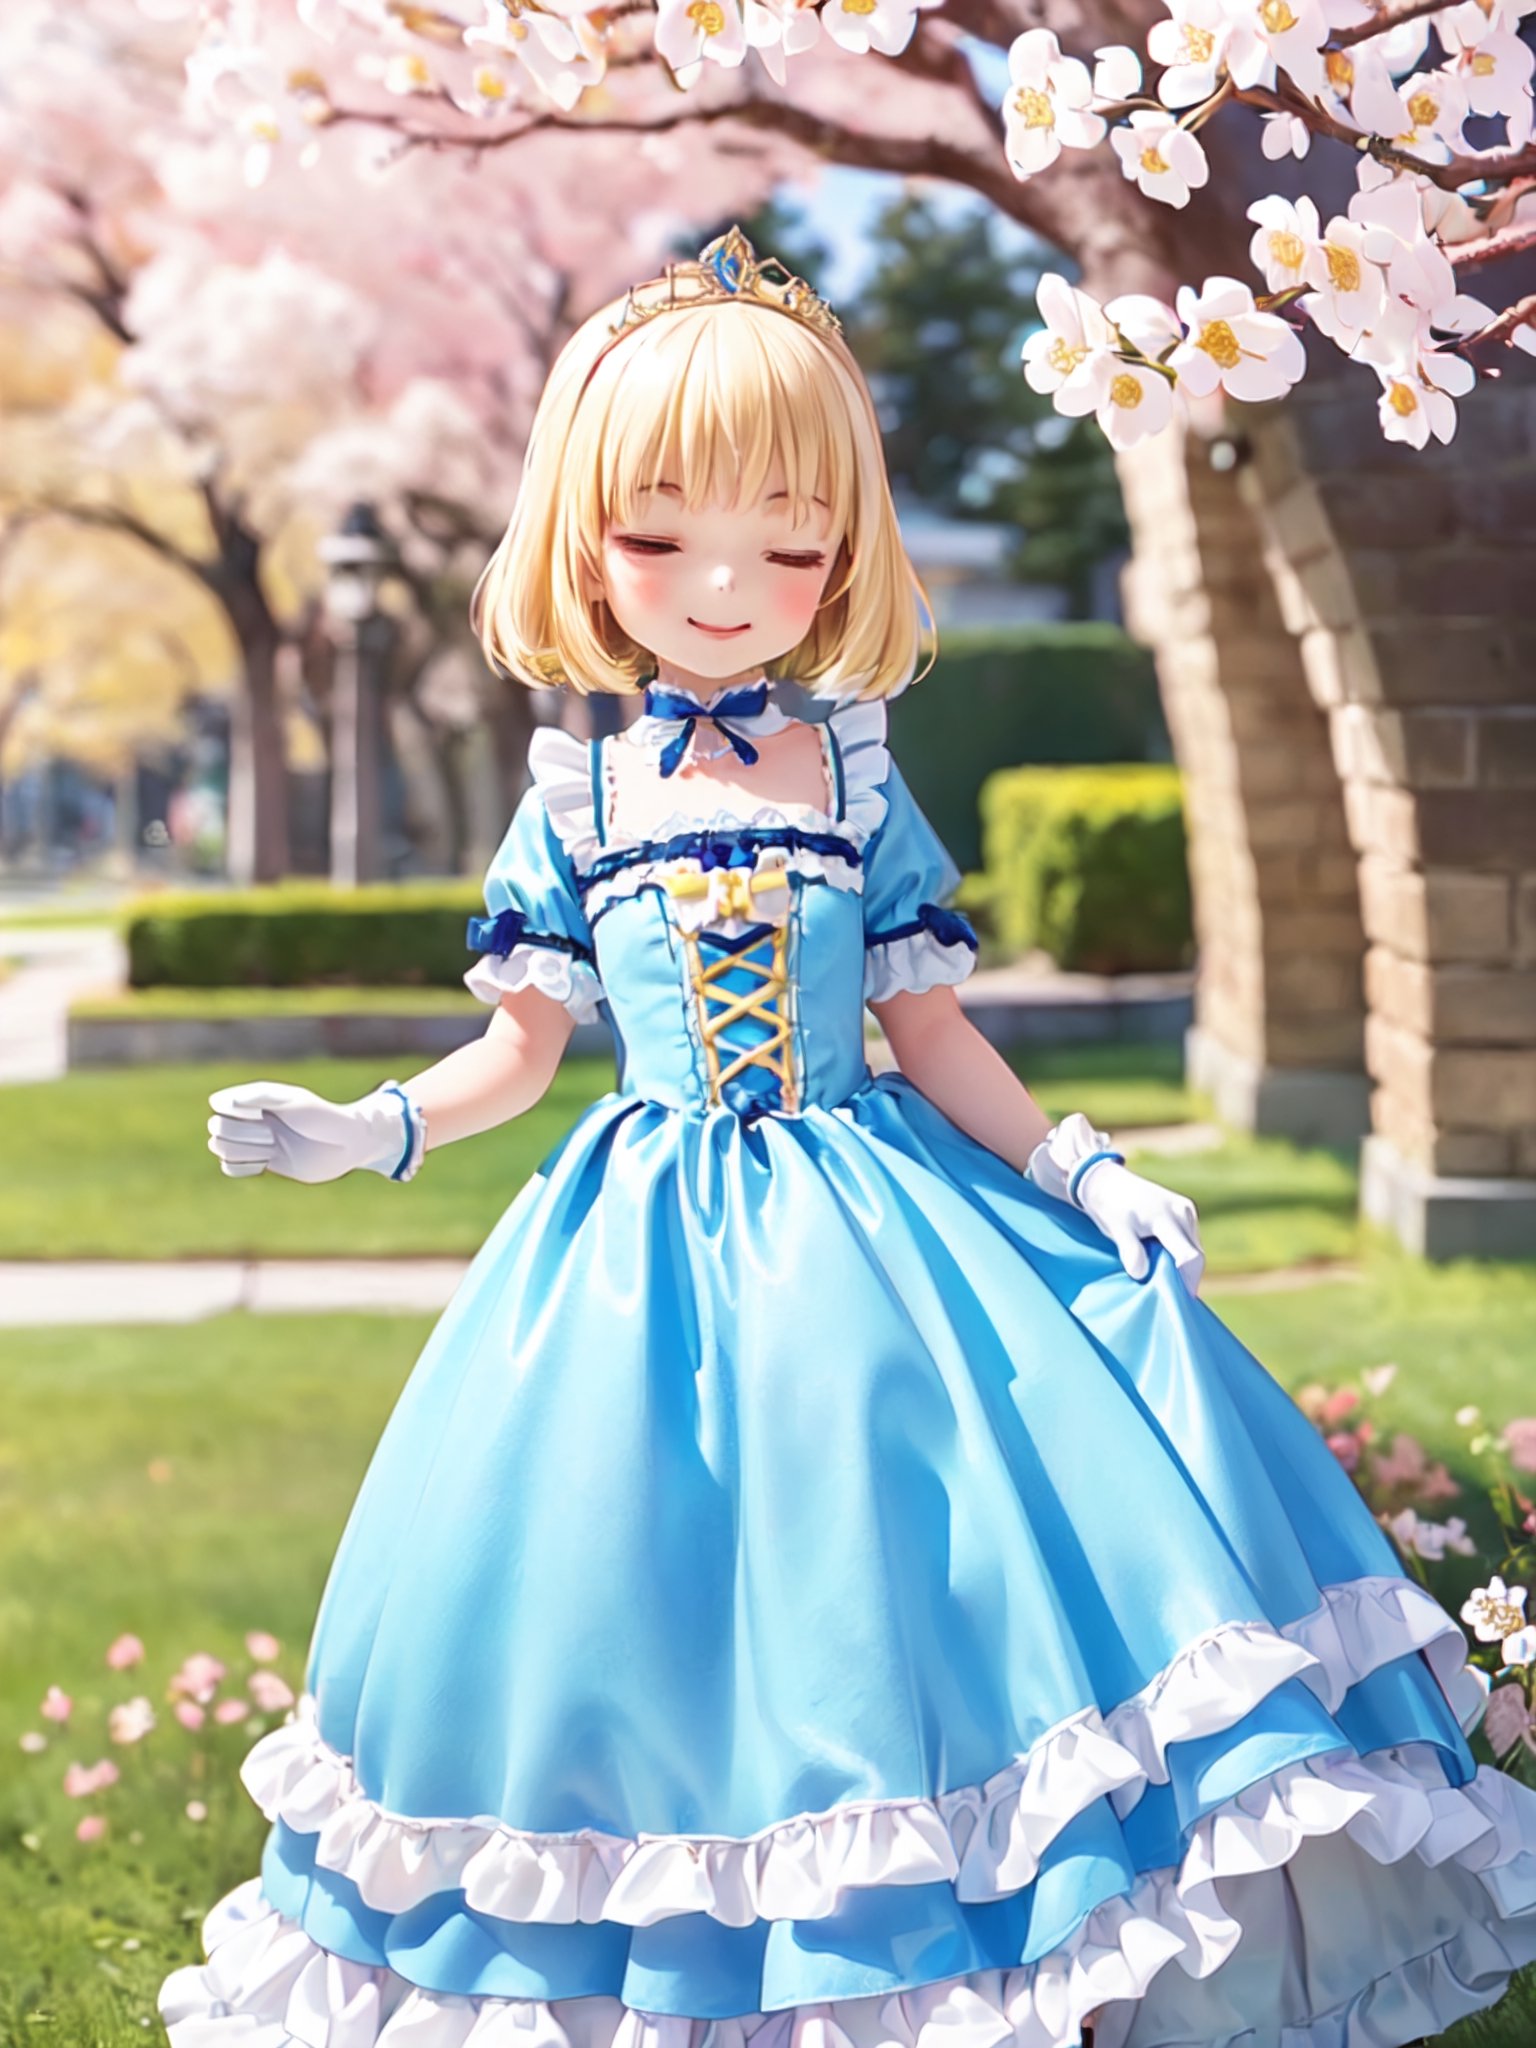 ((12year old girl:1.5)),1girl, loli, petite girl, Portrait, children's body, beautiful shining body, bangs,((blonde hair:1.3)),high eyes,(blue eyes), petite,tall eyes, beautiful girl with fine details, Beautiful and delicate eyes, detailed face, Beautiful eyes,((golden tiara with sapphire decoration)),((light blue gothic lolita ball gown:1.4)),((long skirt:1.7)),(( white neck ruffle, white frill)),((white tights)), blue shoes, ((white gloves with gold decoration)), natural light,((realism: 1.2 )), dynamic far view shot,cinematic lighting, perfect composition, by sumic.mic, ultra detailed, official art, masterpiece, (best quality:1.3), reflections, extremely detailed cg unity 8k wallpaper, detailed background, masterpiece, best quality , (masterpiece), (best quality:1.4), (ultra highres:1.2), (hyperrealistic:1.4), (photorealistic:1.2), best quality, high quality, highres, (short hair:1.4)),((tareme,animated eyes, big eyes,droopy eyes:1.2)),cherry tree,cherry blossoms,((Smile, eyes closed: 1.4)),(Cherry blossom background in full bloom:1.4)),perfect,hand,animemia,outdoor